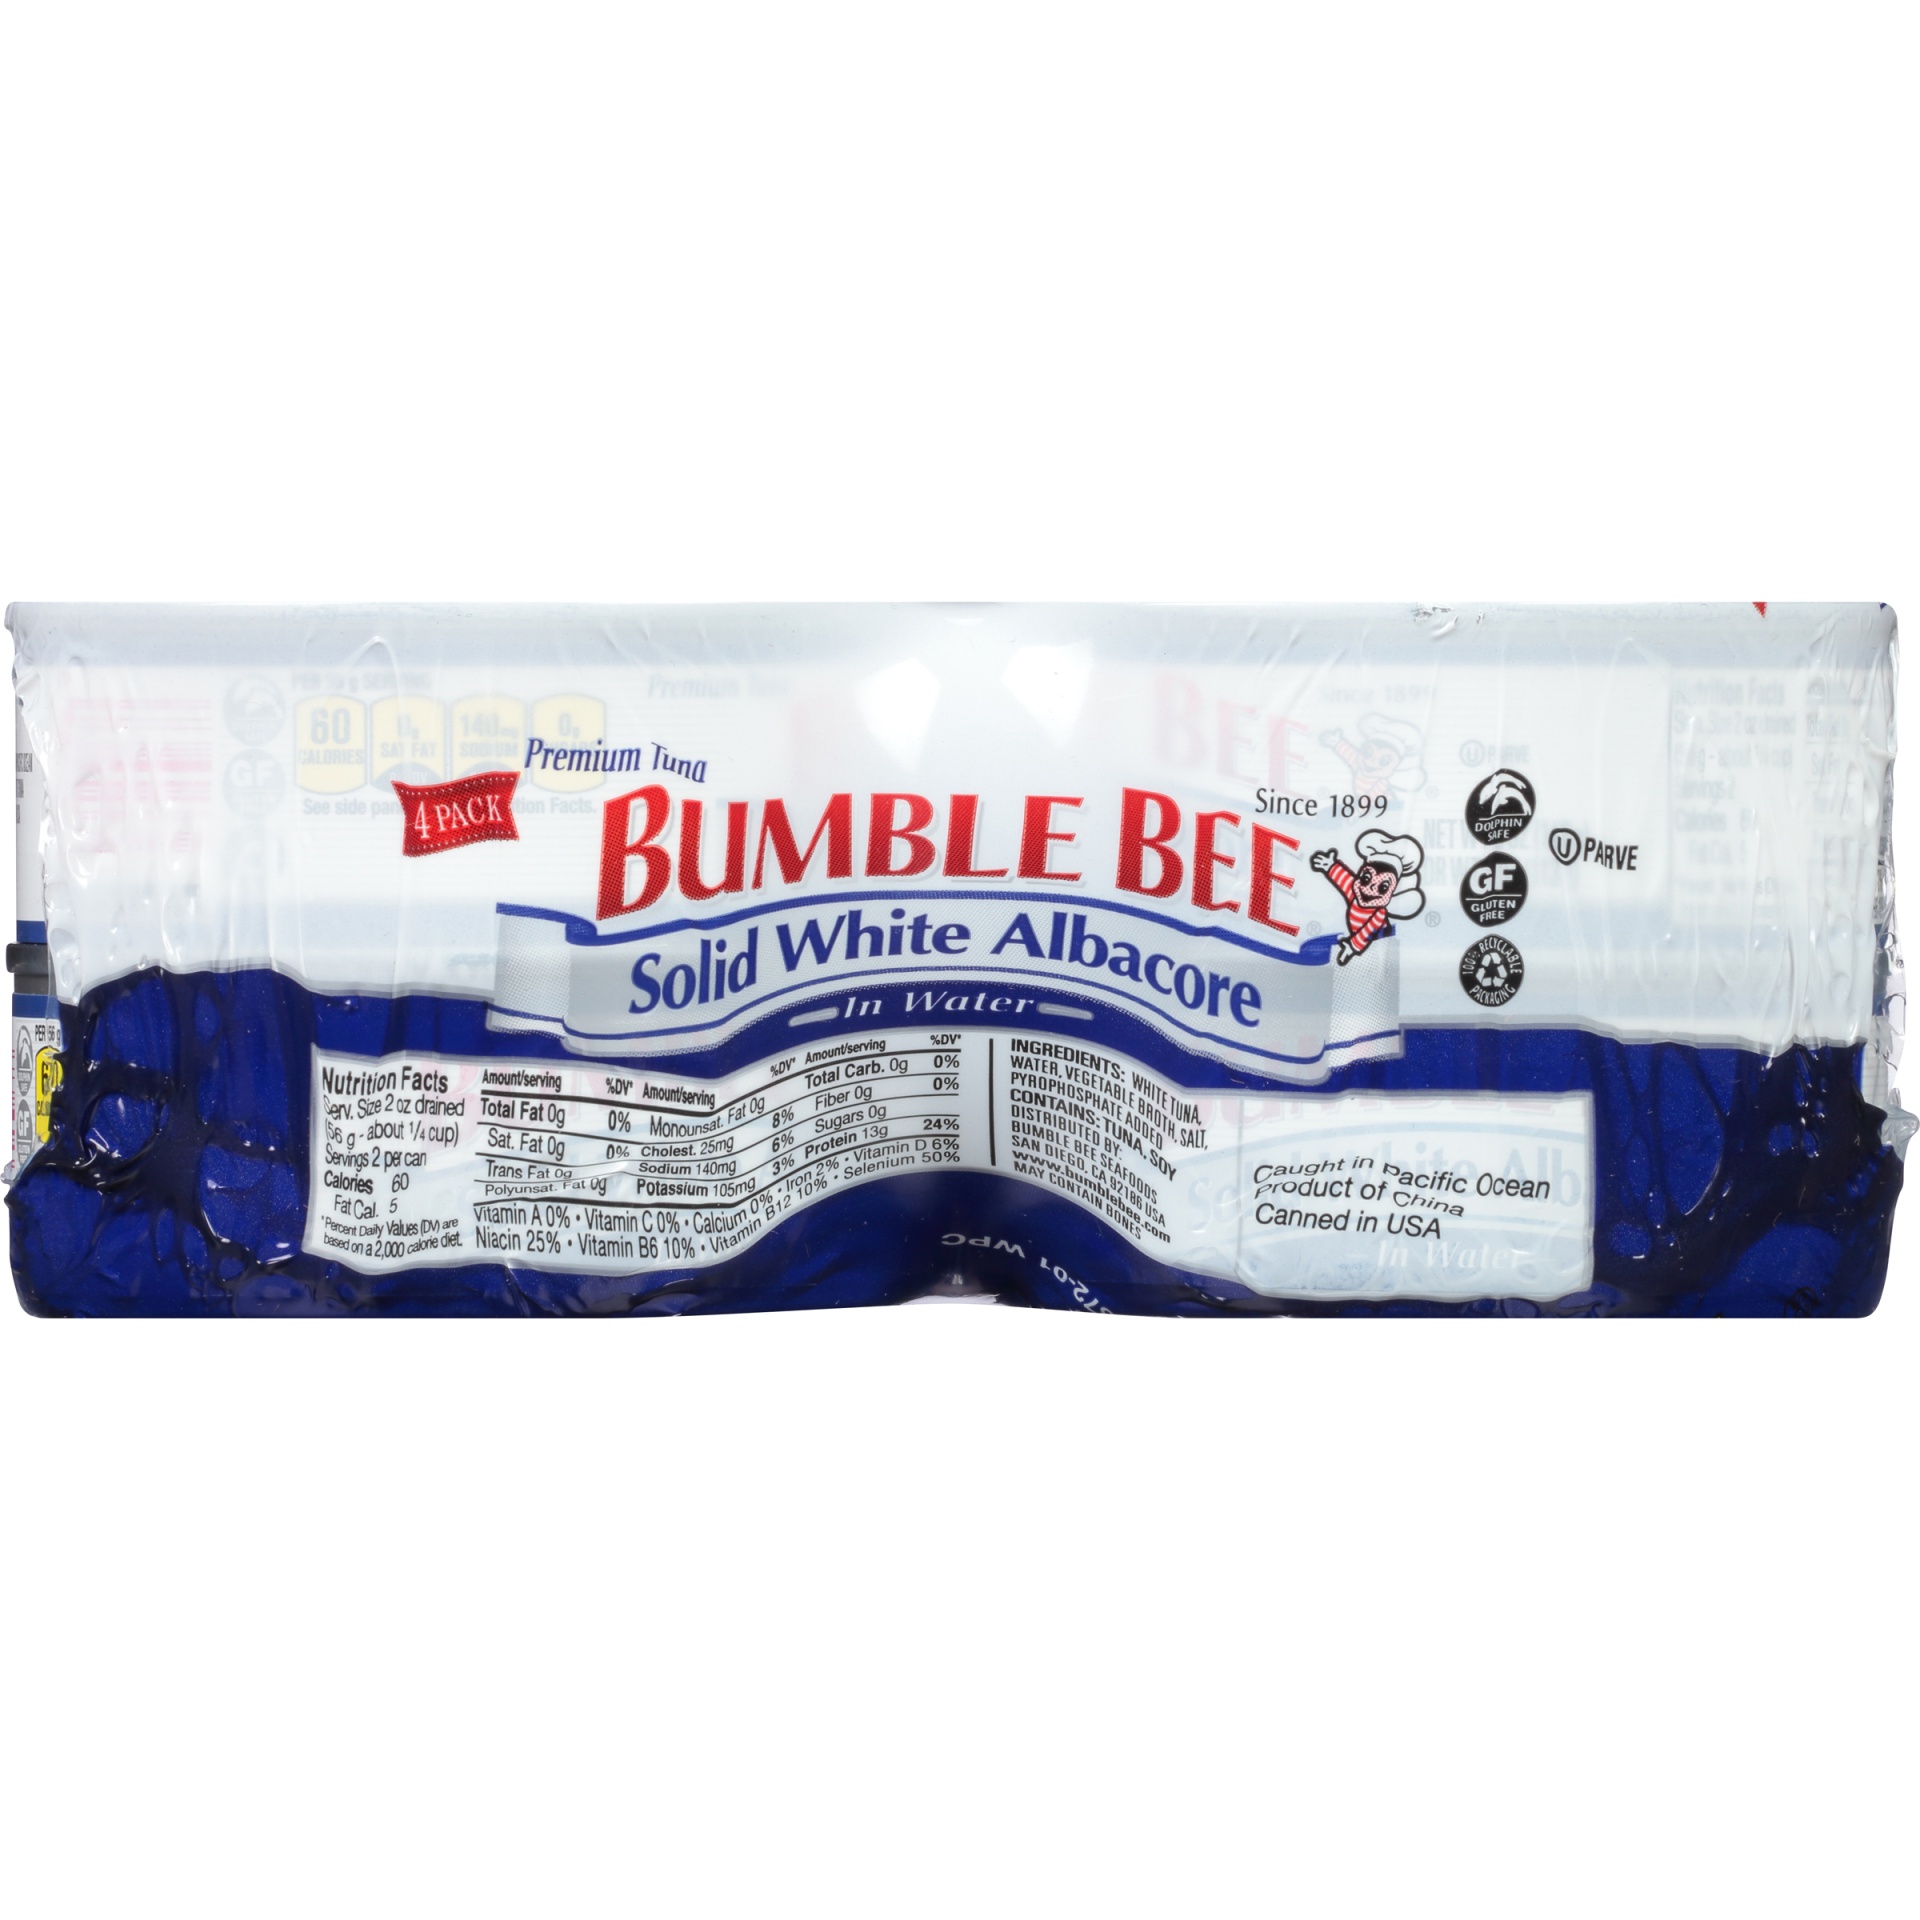 slide 6 of 8, Bumble Bee Solid White Albacore Tuna in Water, 20 oz